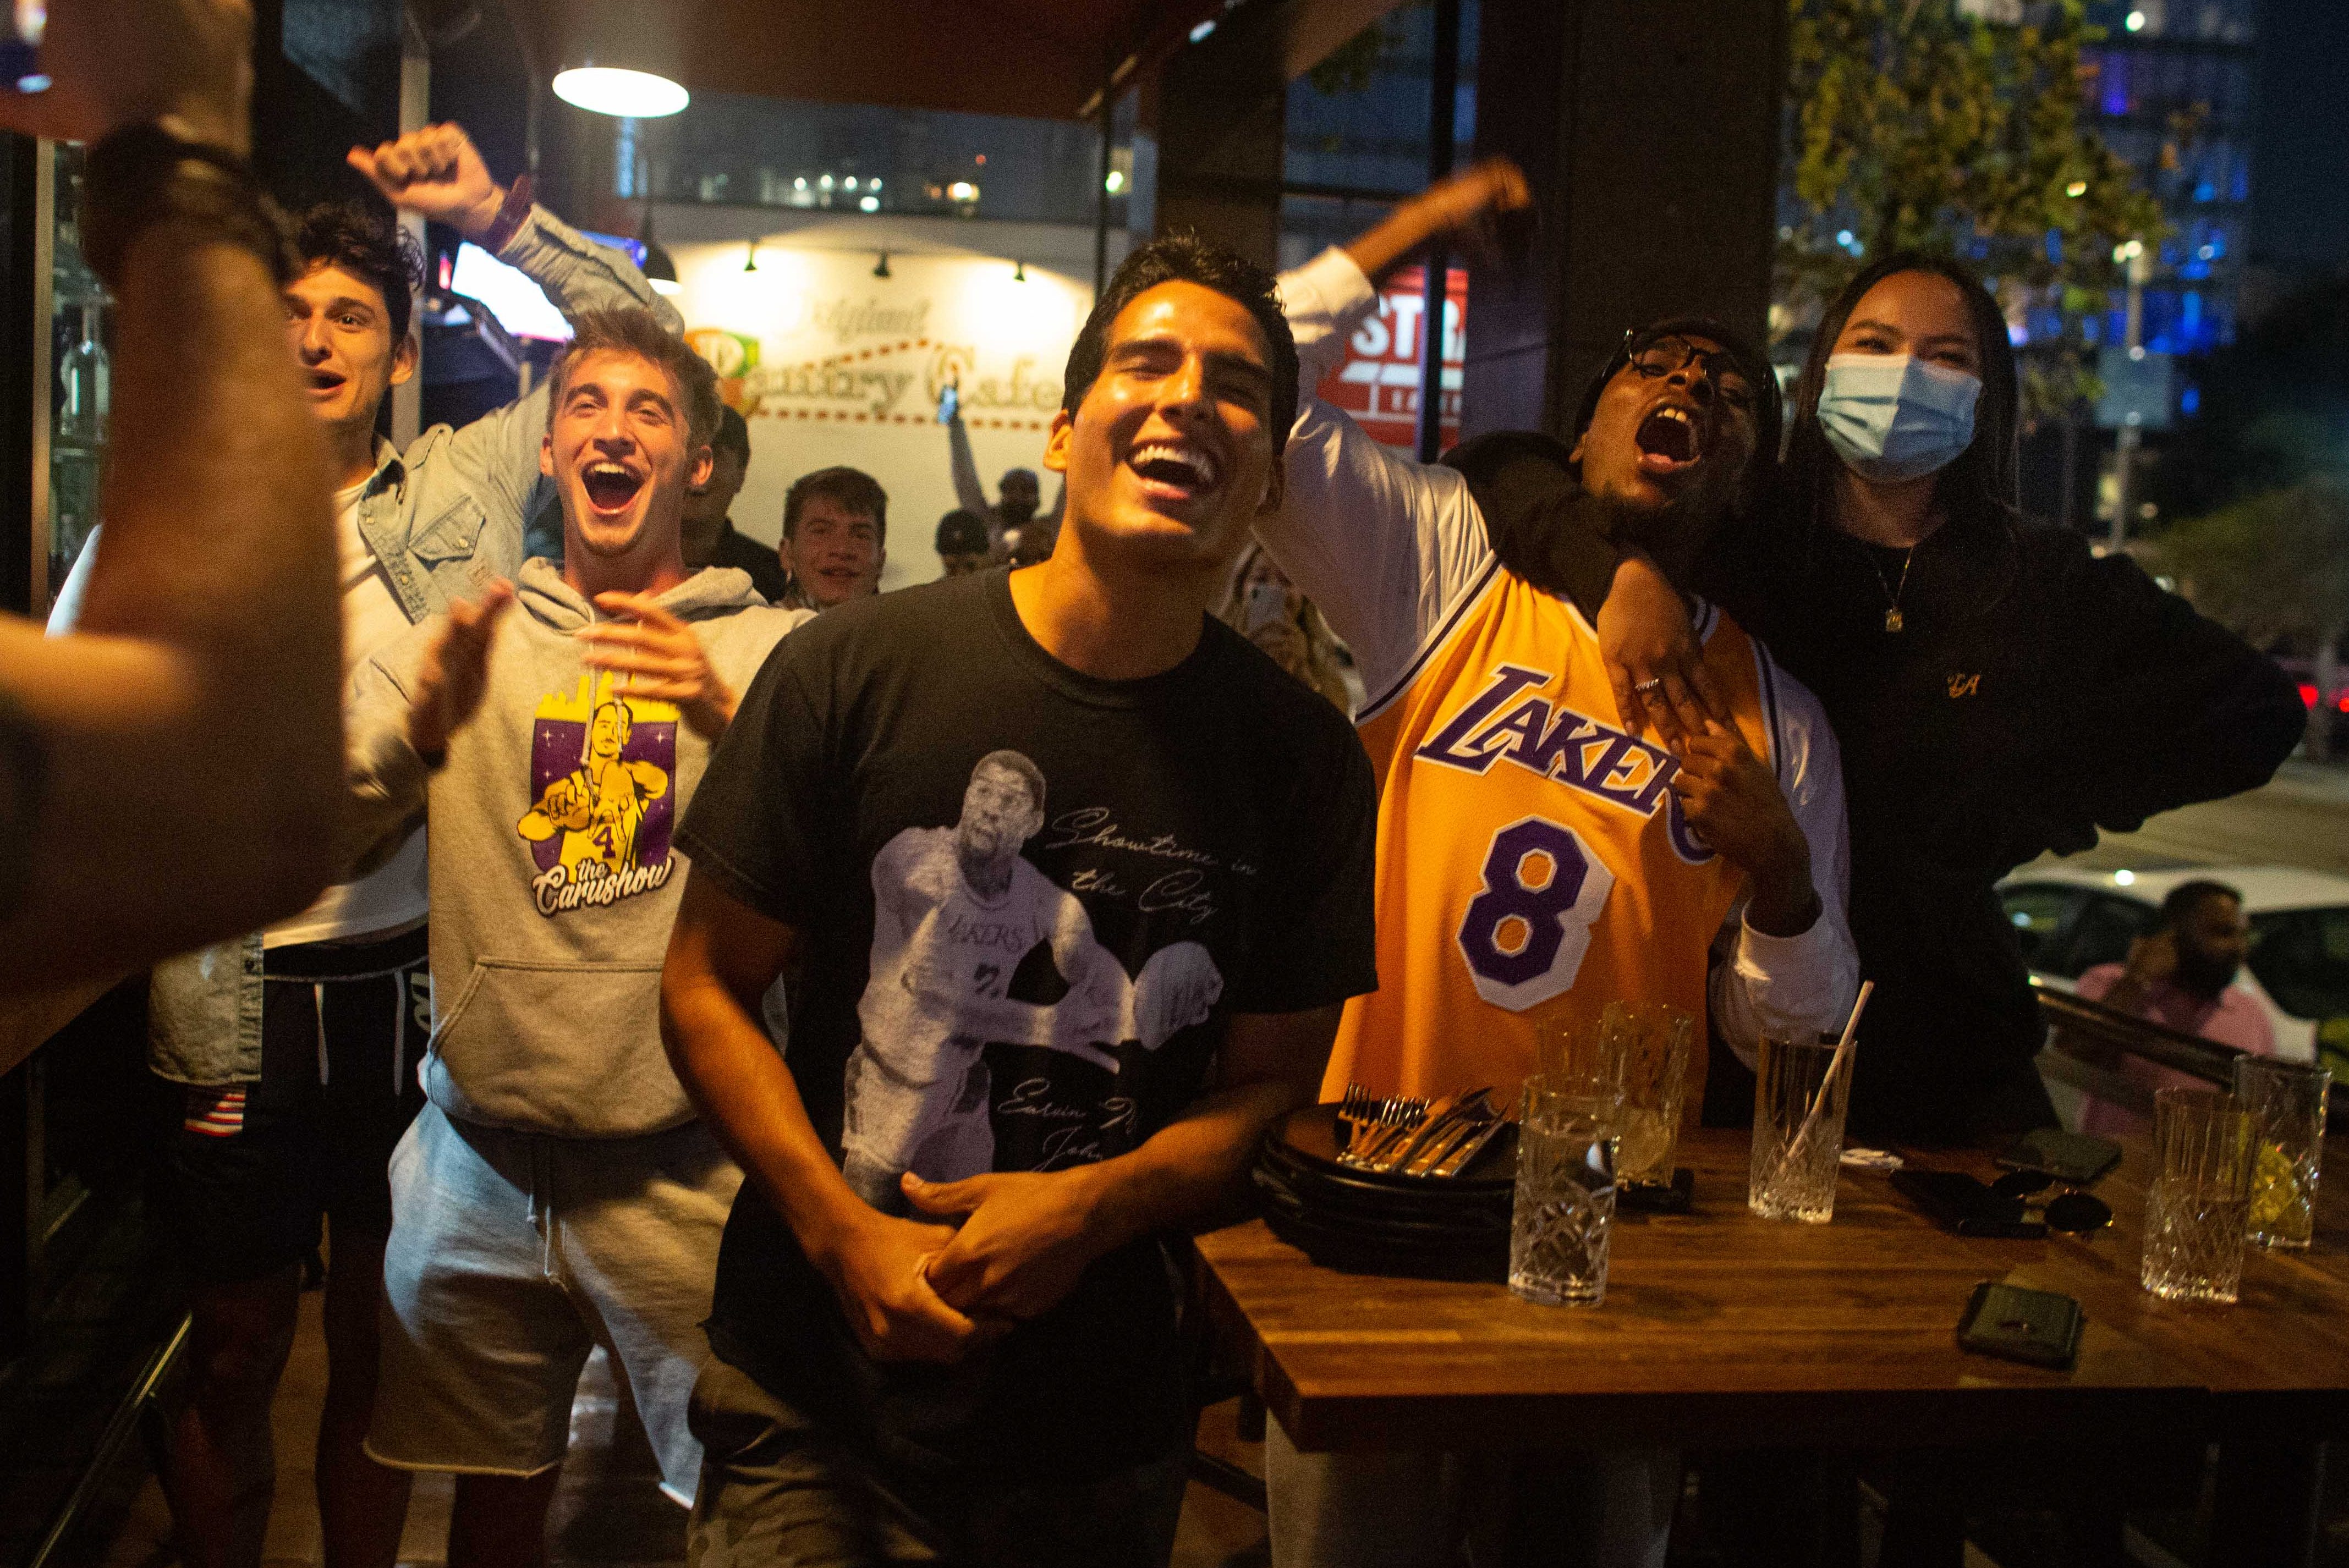 Los Angeles Lakers fans